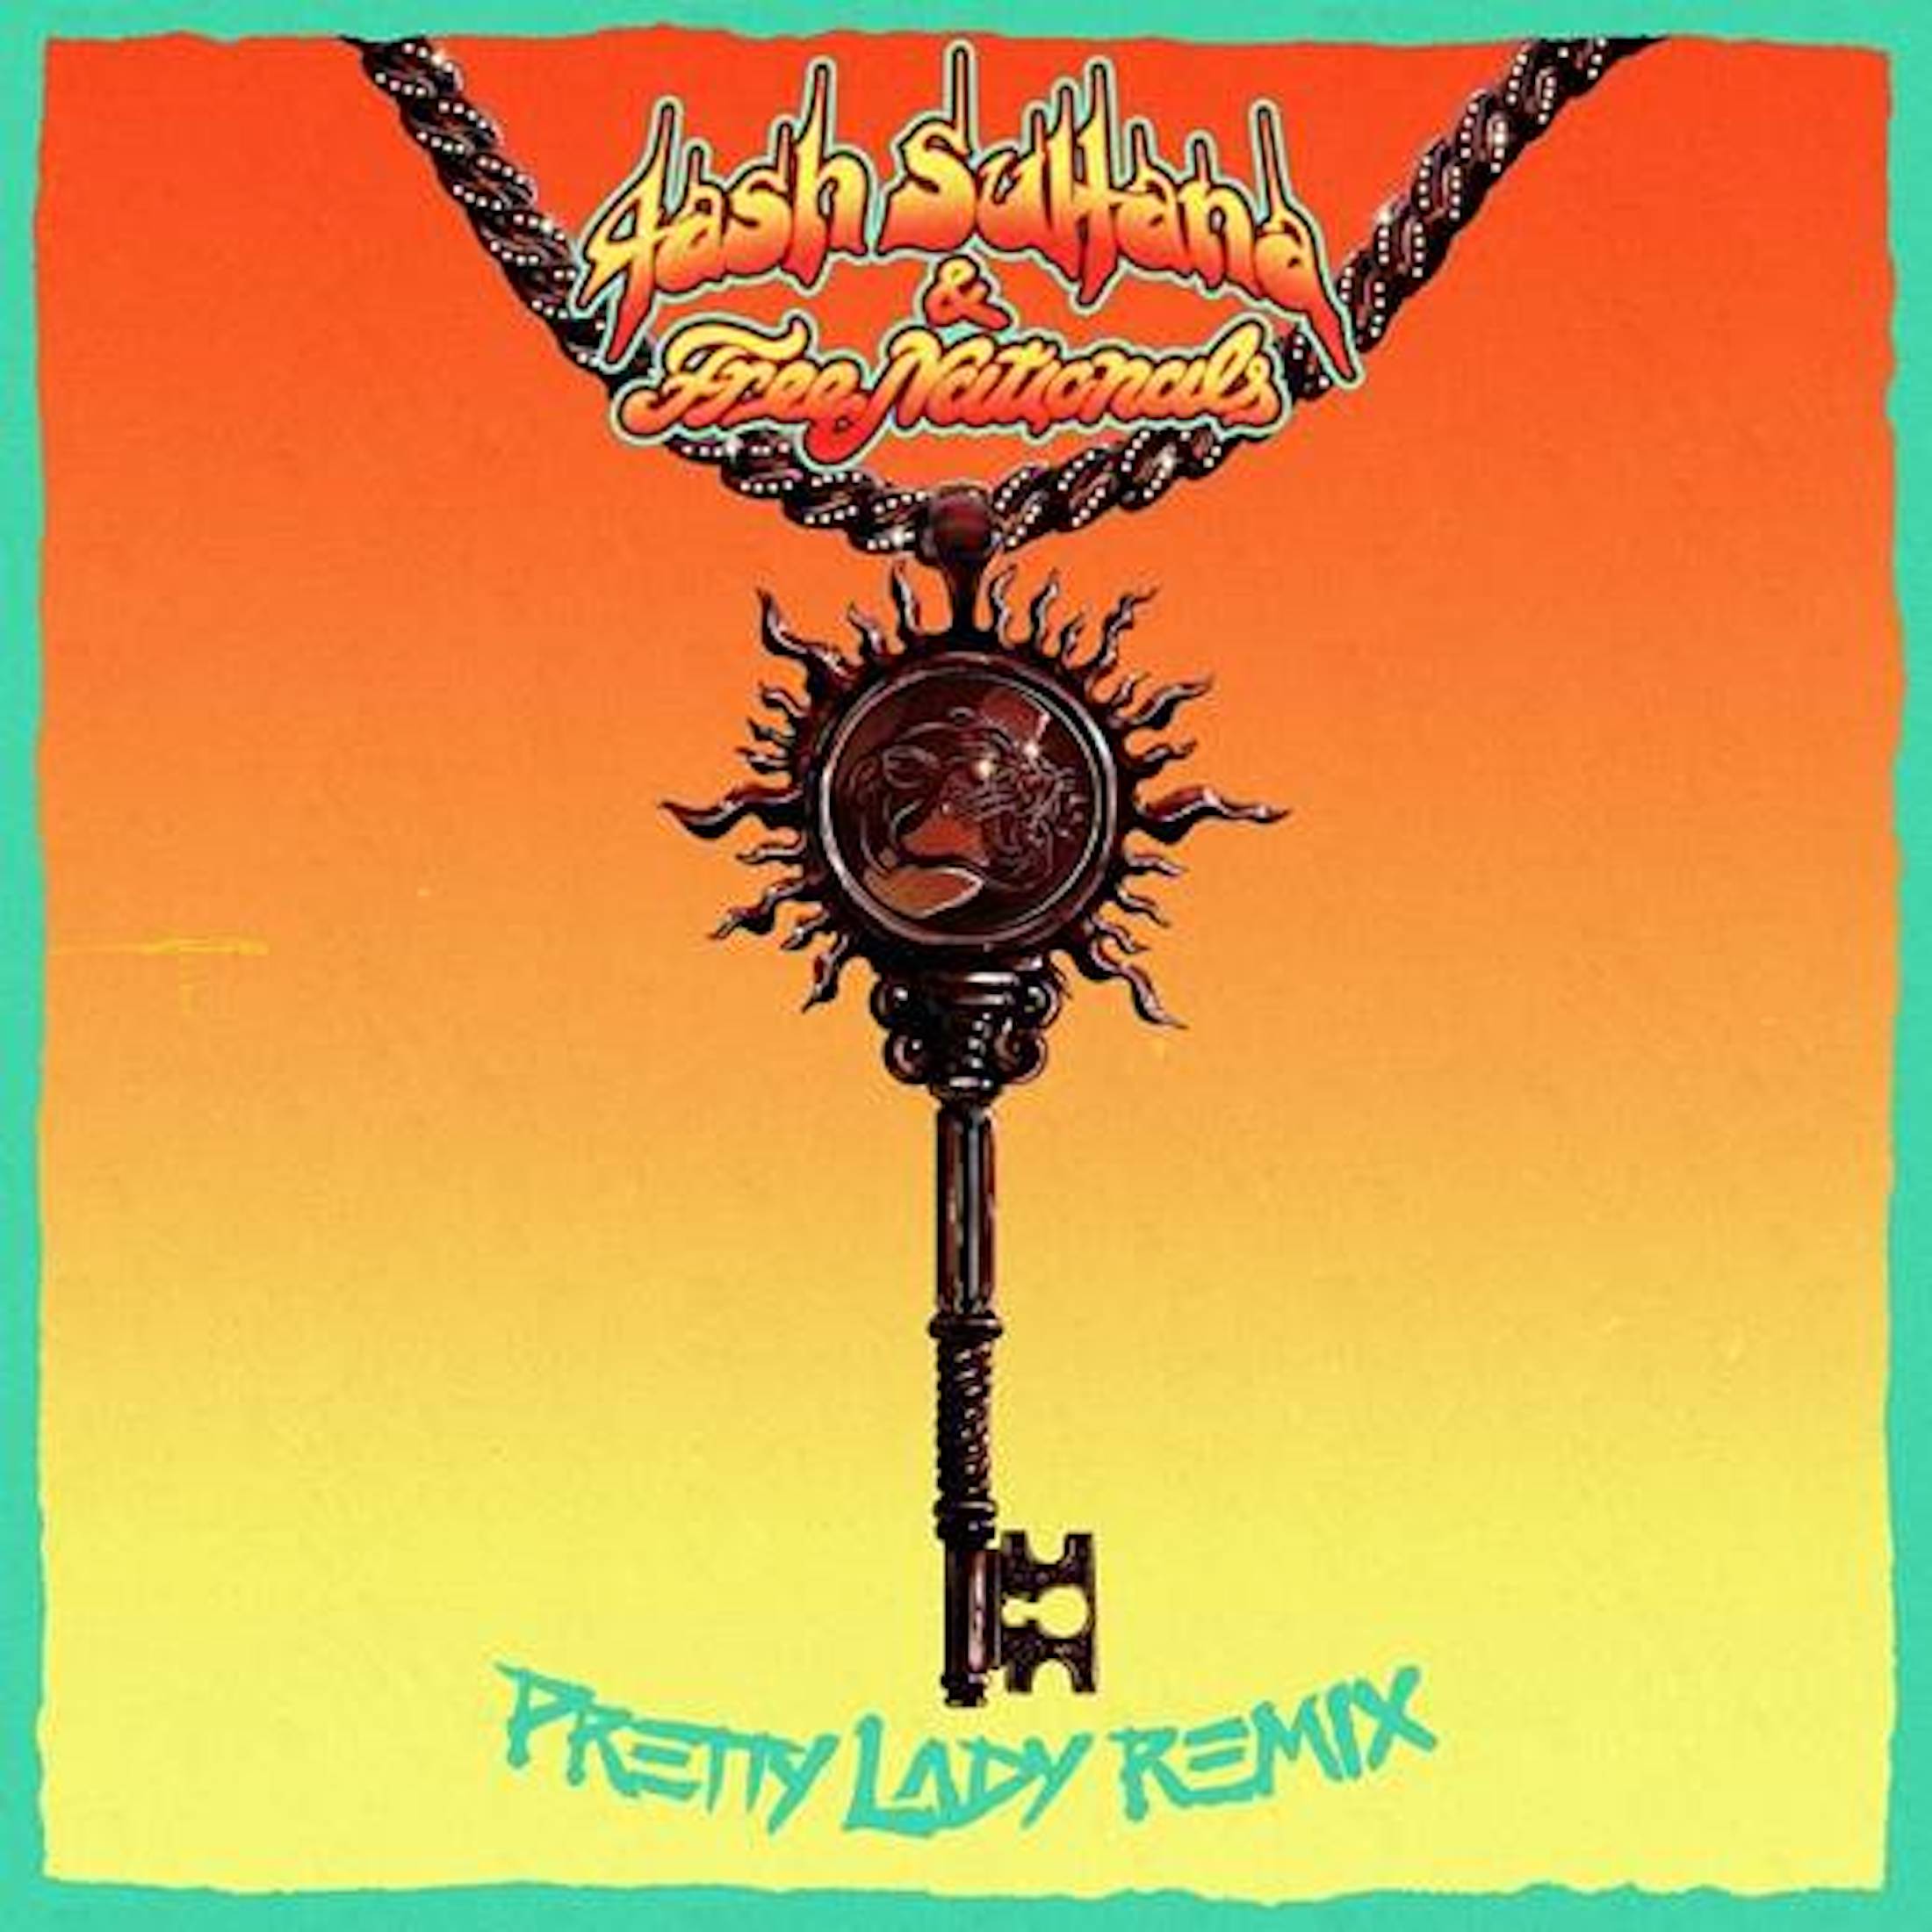 TASH SULTANA RELEASES ‘PRETTY LADY (FREE NATIONALS REMIX)’